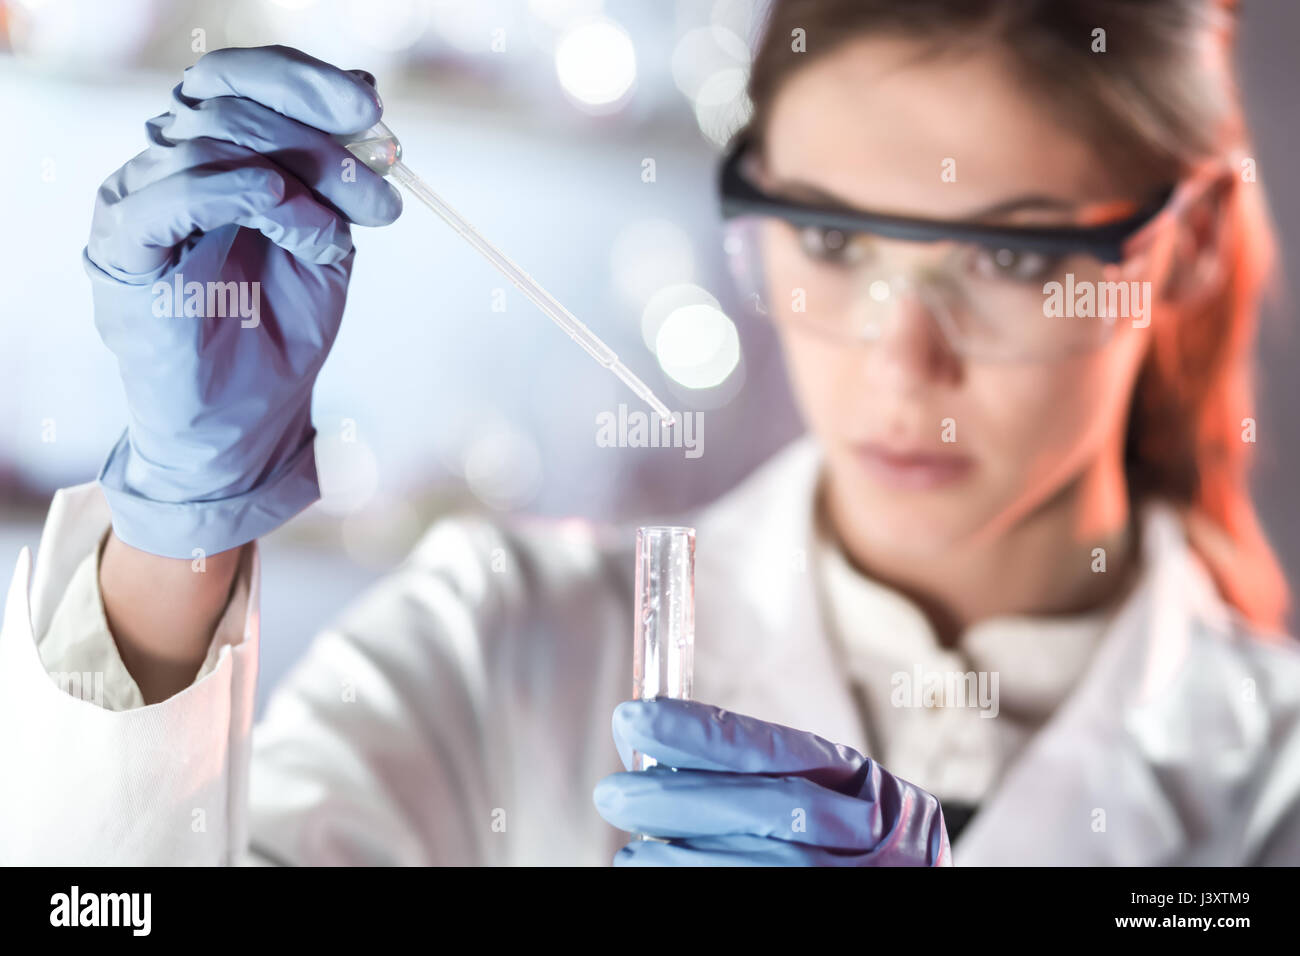 Young scientist pipetting in life science laboratory. Stock Photo